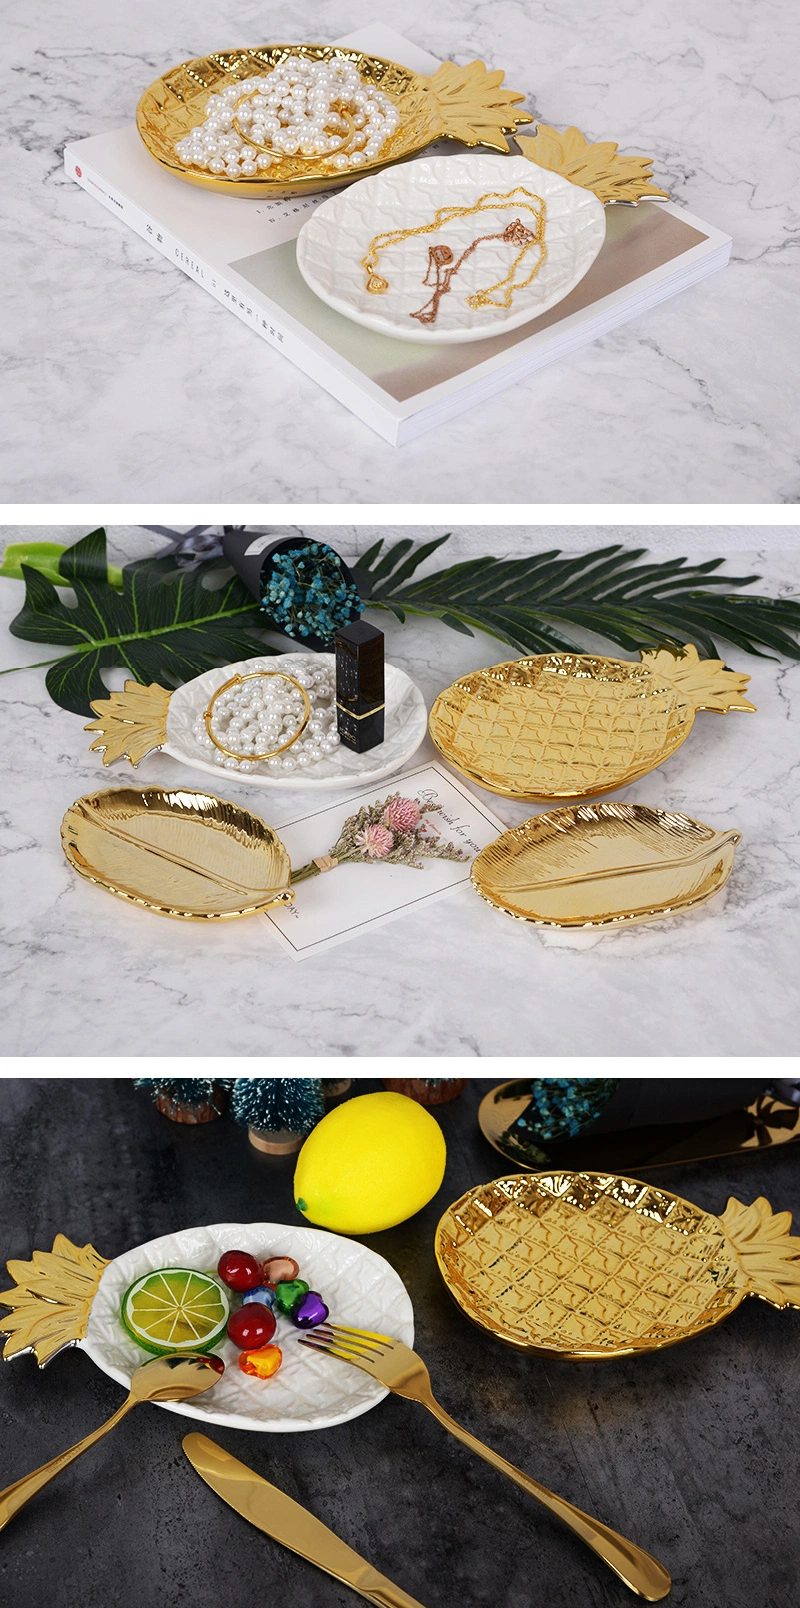 Golden Pineapple Plate Nordic Ceramic Pineapple Shaped Storage Tray Pastry Dessert Plate Fruit Plate